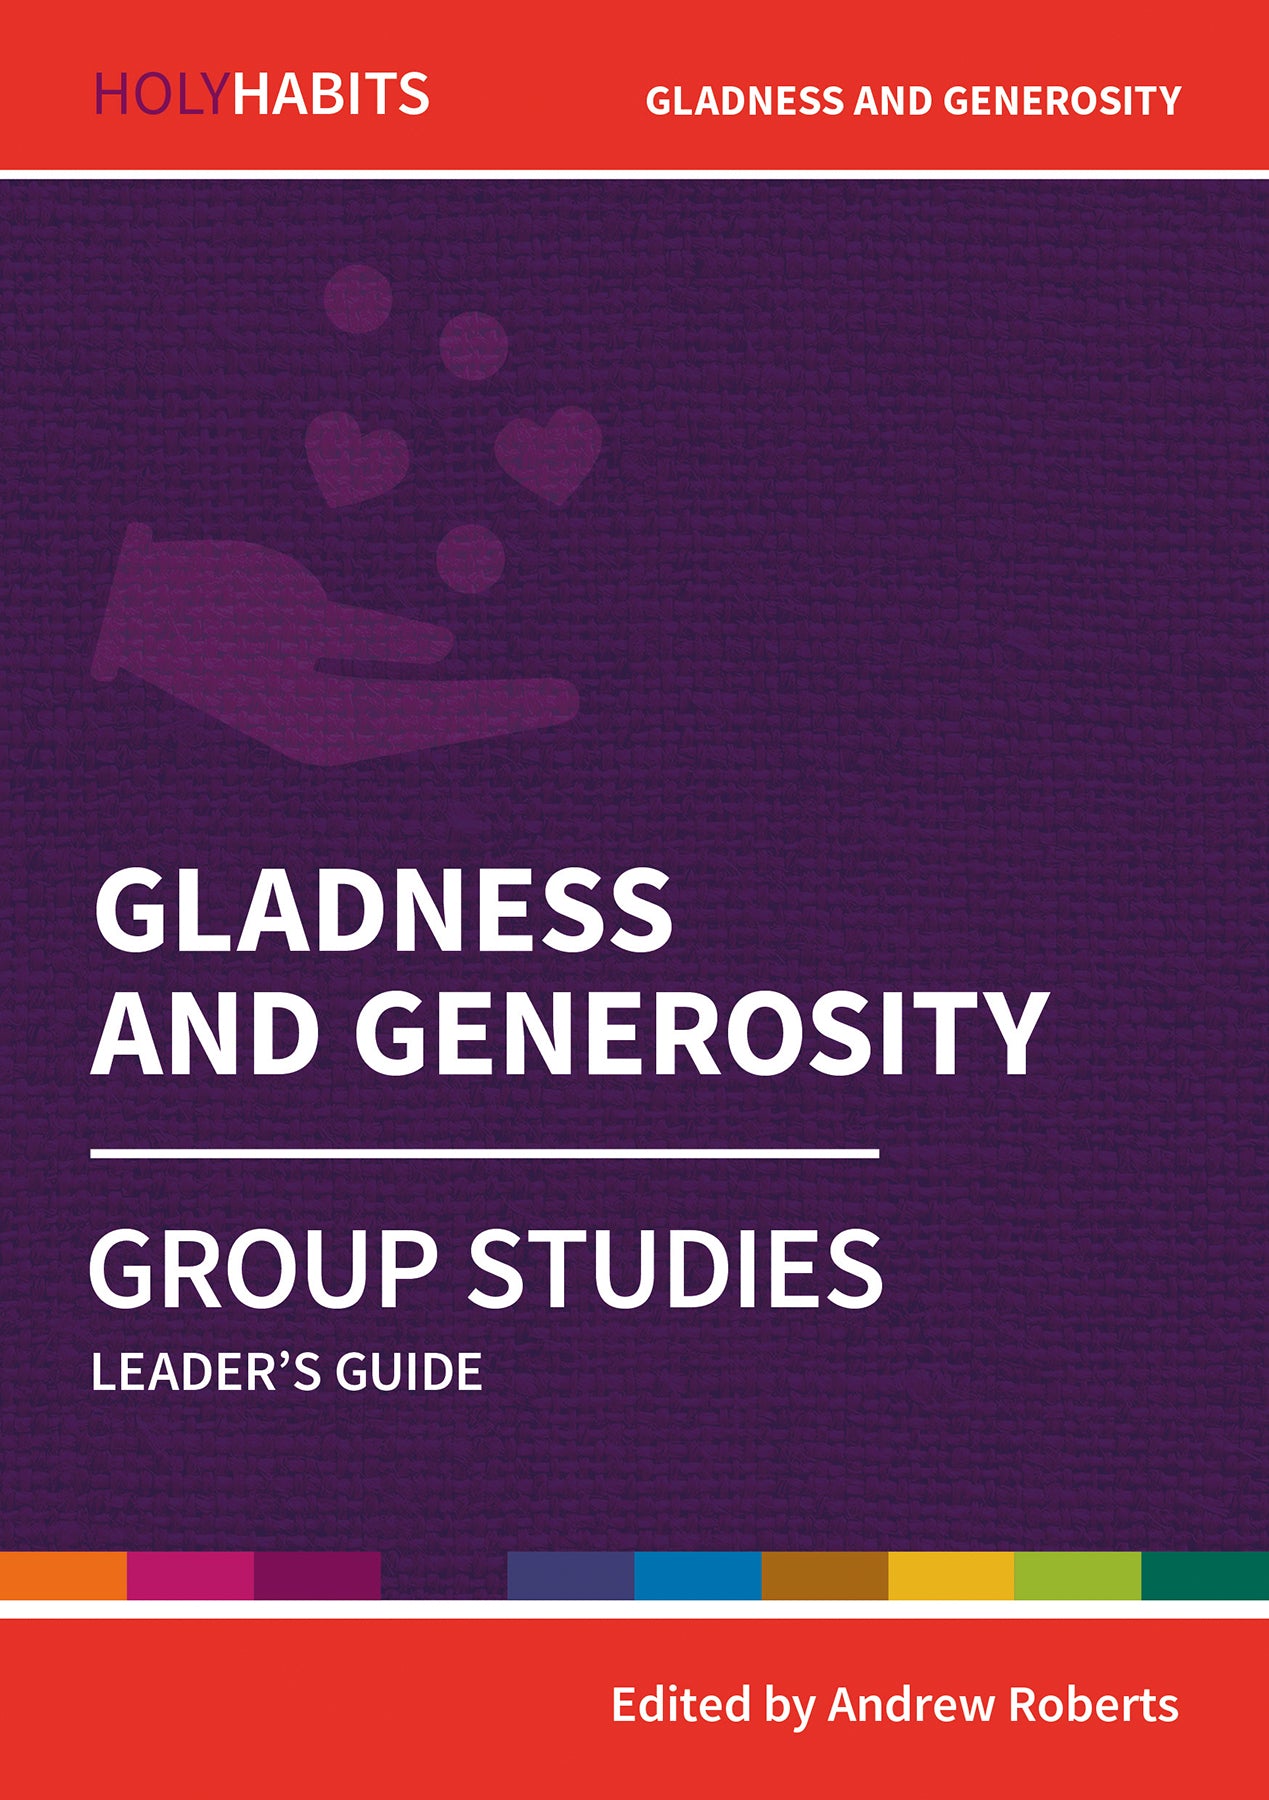 Image of Holy Habits Group Studies: Gladness and Generosity other